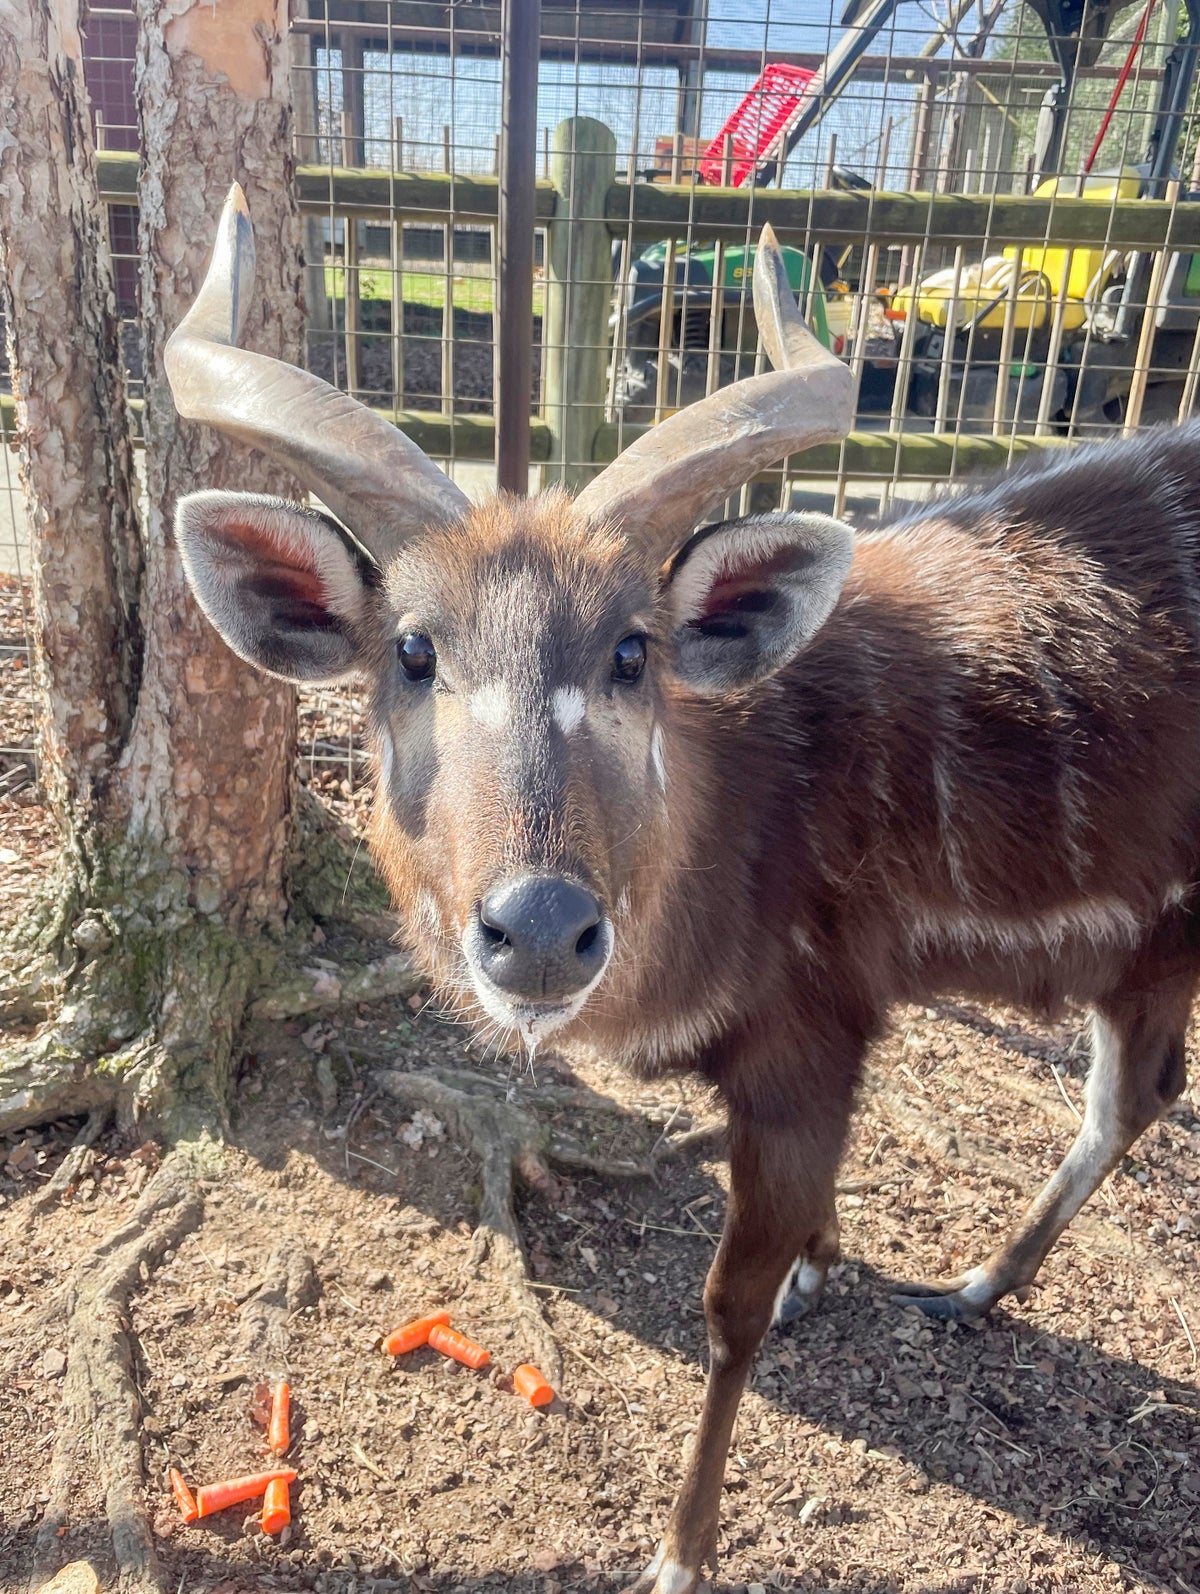 Zoo in Tennessee blames squeezable food pouch for beloved antelope’s death